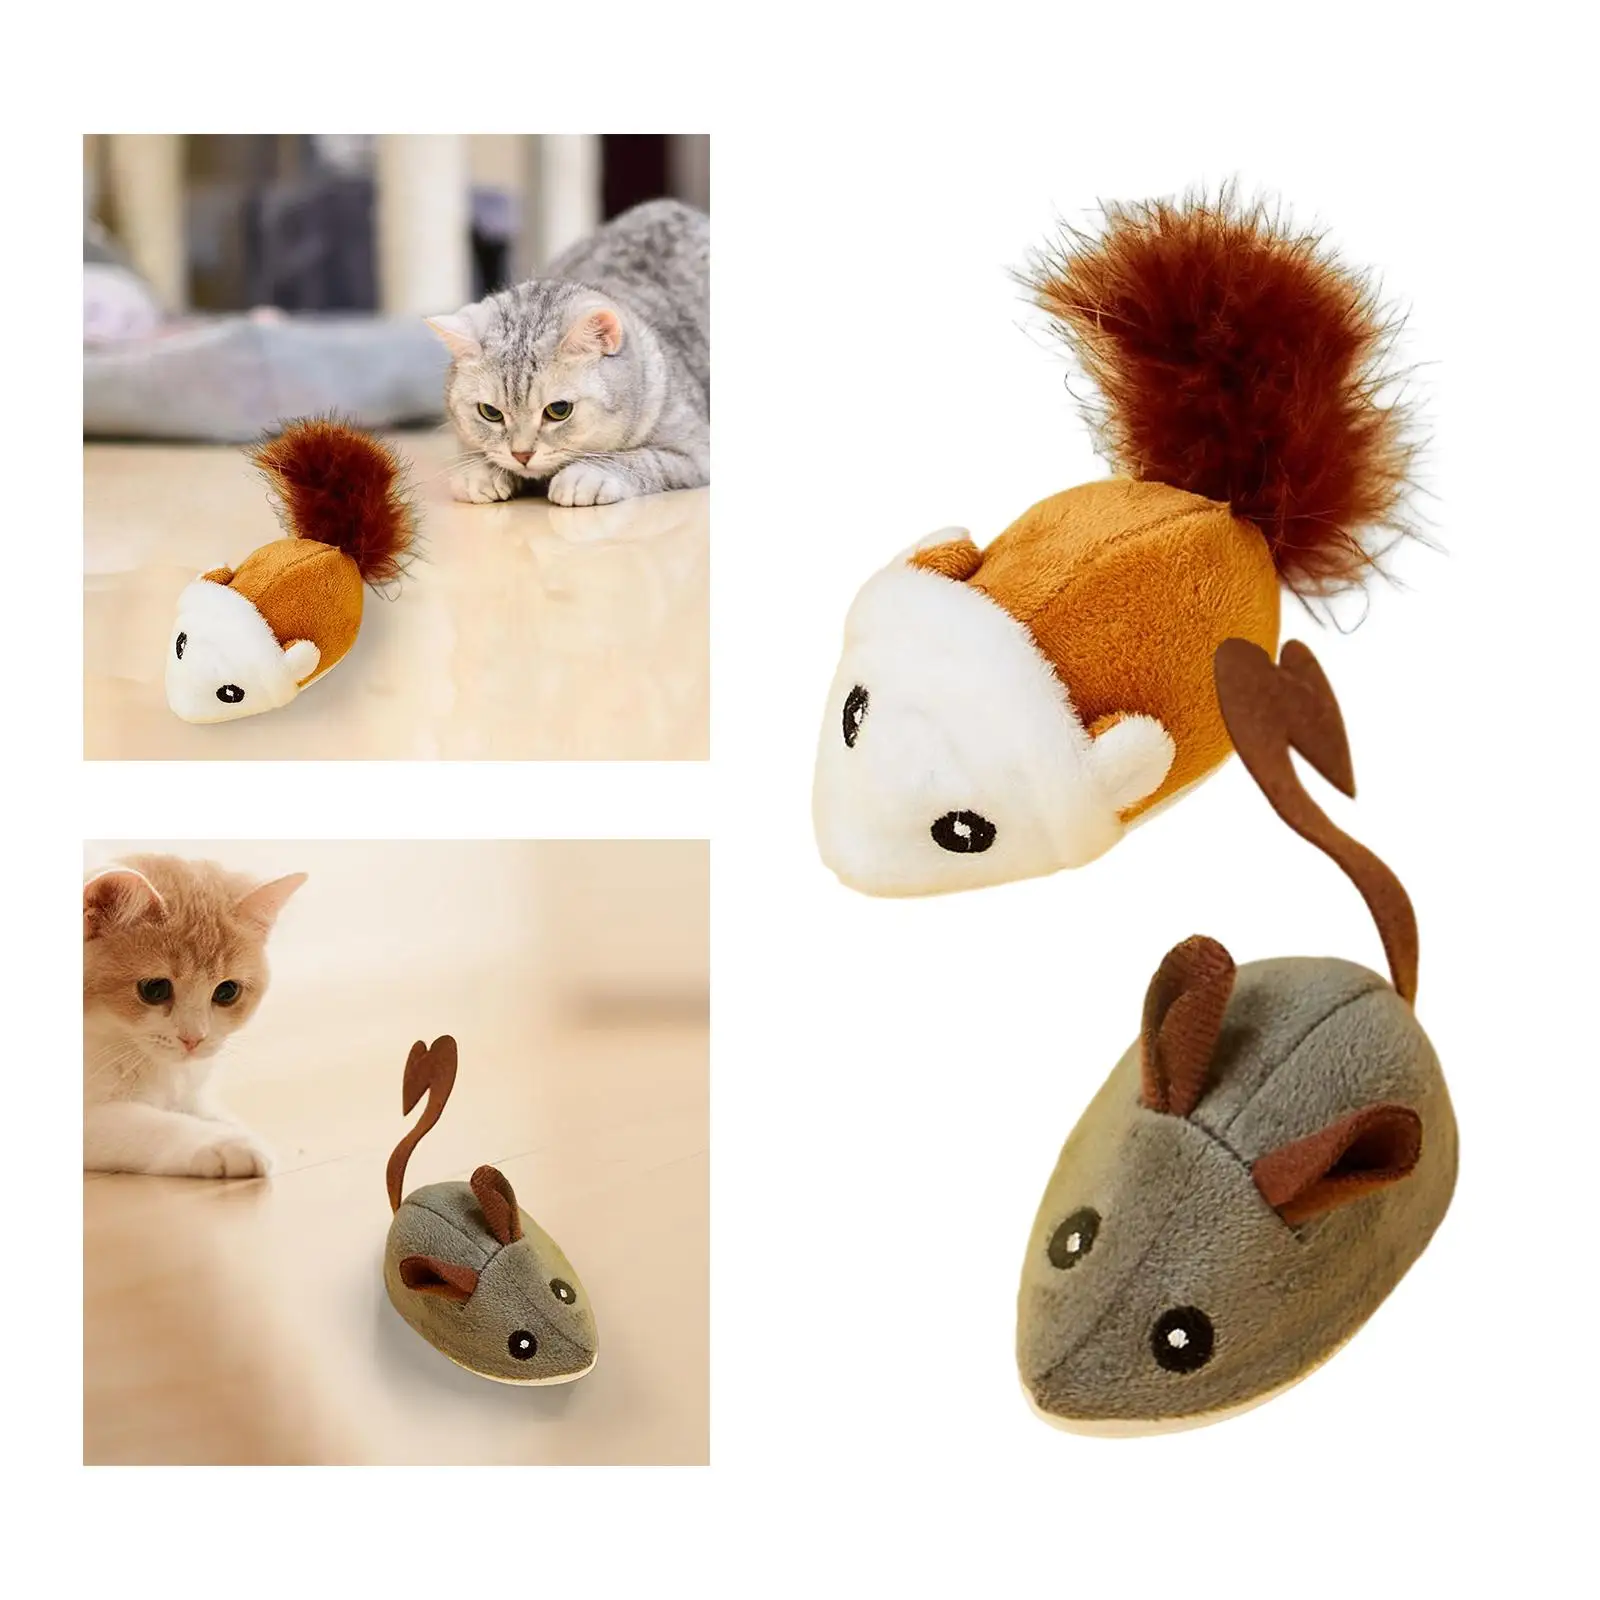 Plush Toys Electric Moving Soft Realistic Furry Plush Cat Toy for Cats Kitten Indoor